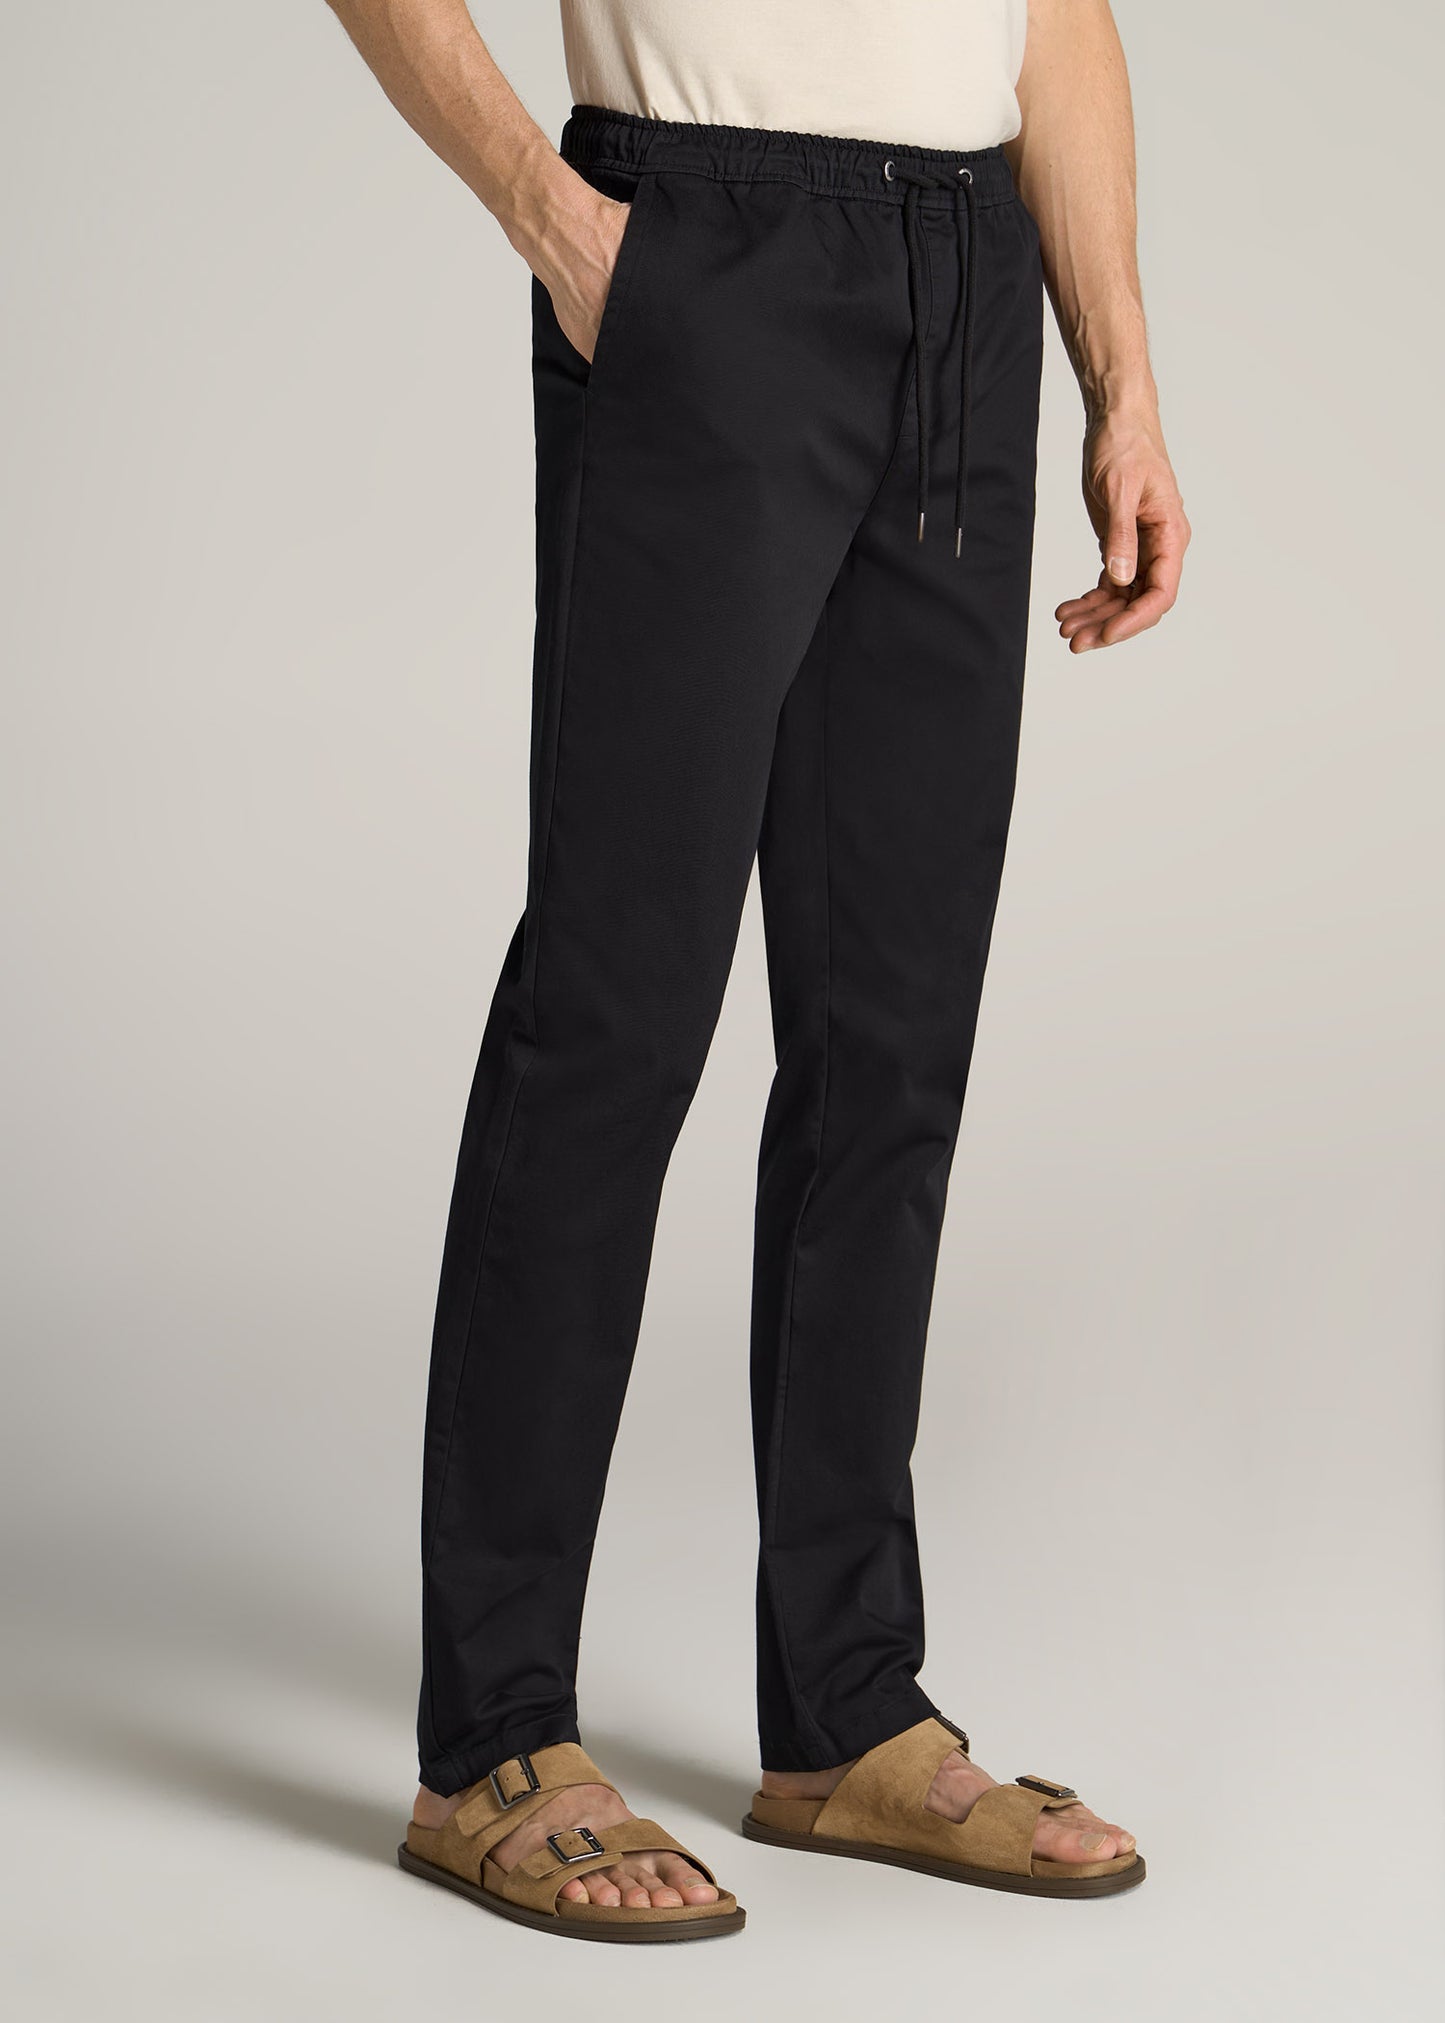 American-Tall-Men-Pull-On-Deck-Stretch-Pants-Black-side